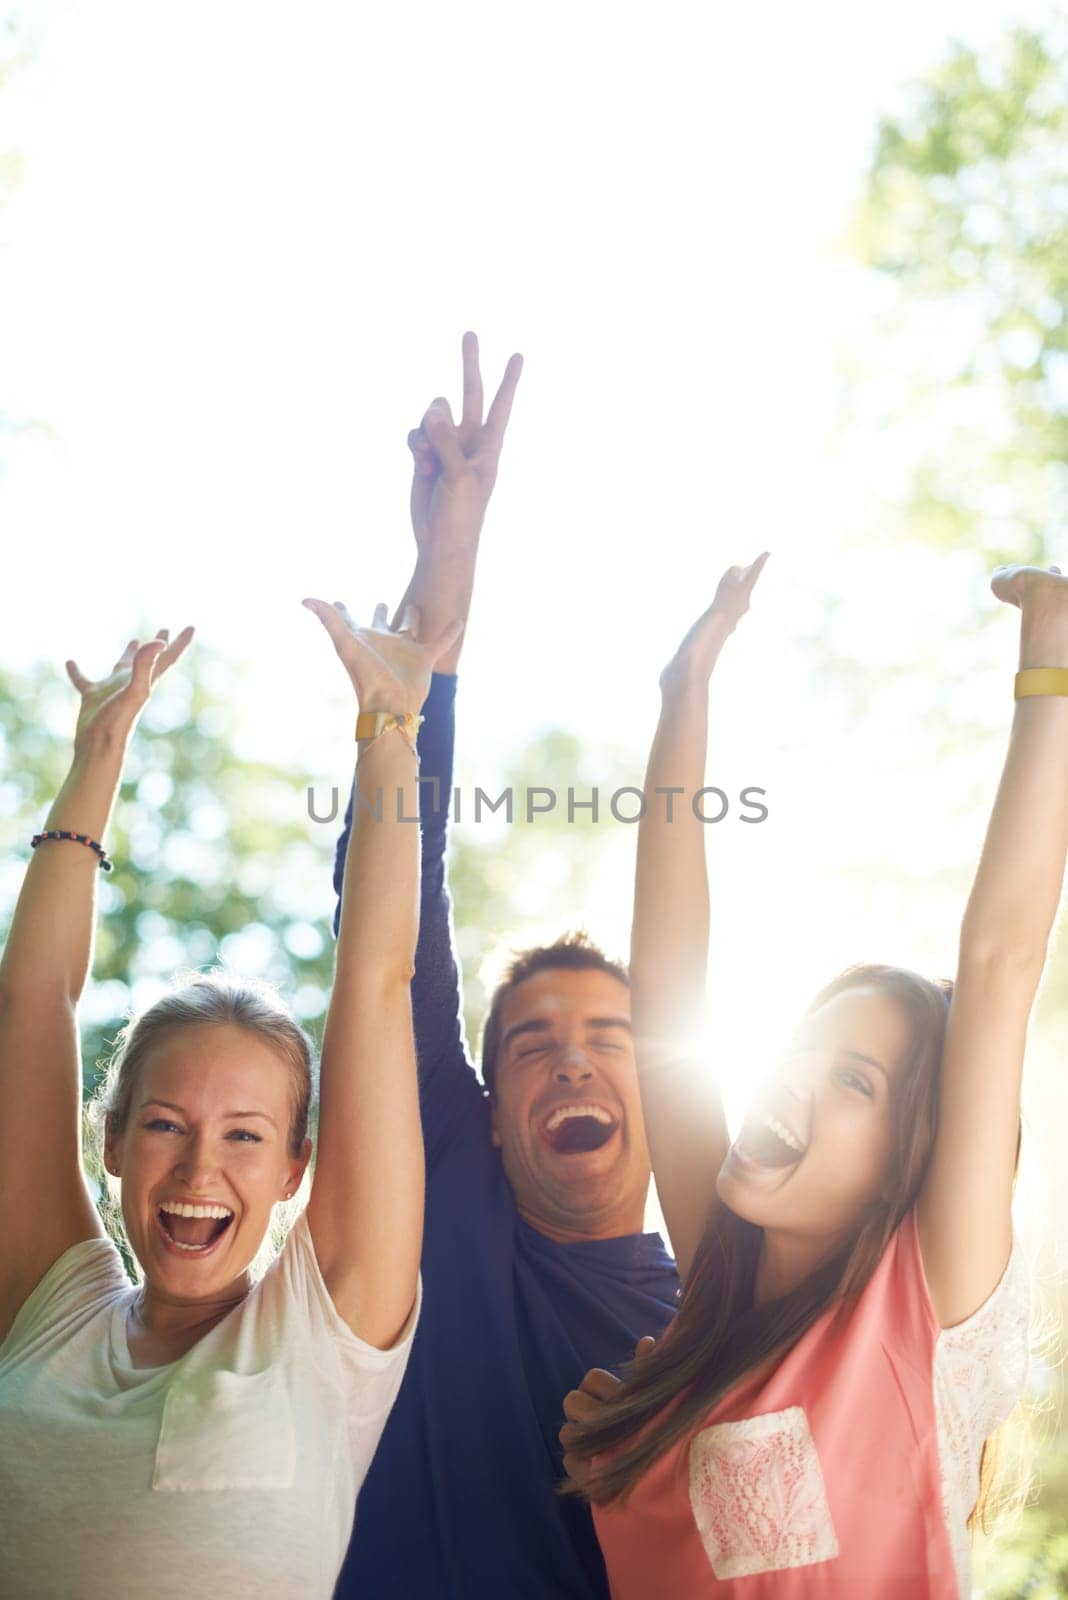 Portrait, outdoor and friends with party, excited and social event with music festival, happiness or summer. Face, people or group with lens flare, sunshine or weekend break with celebration or smile.